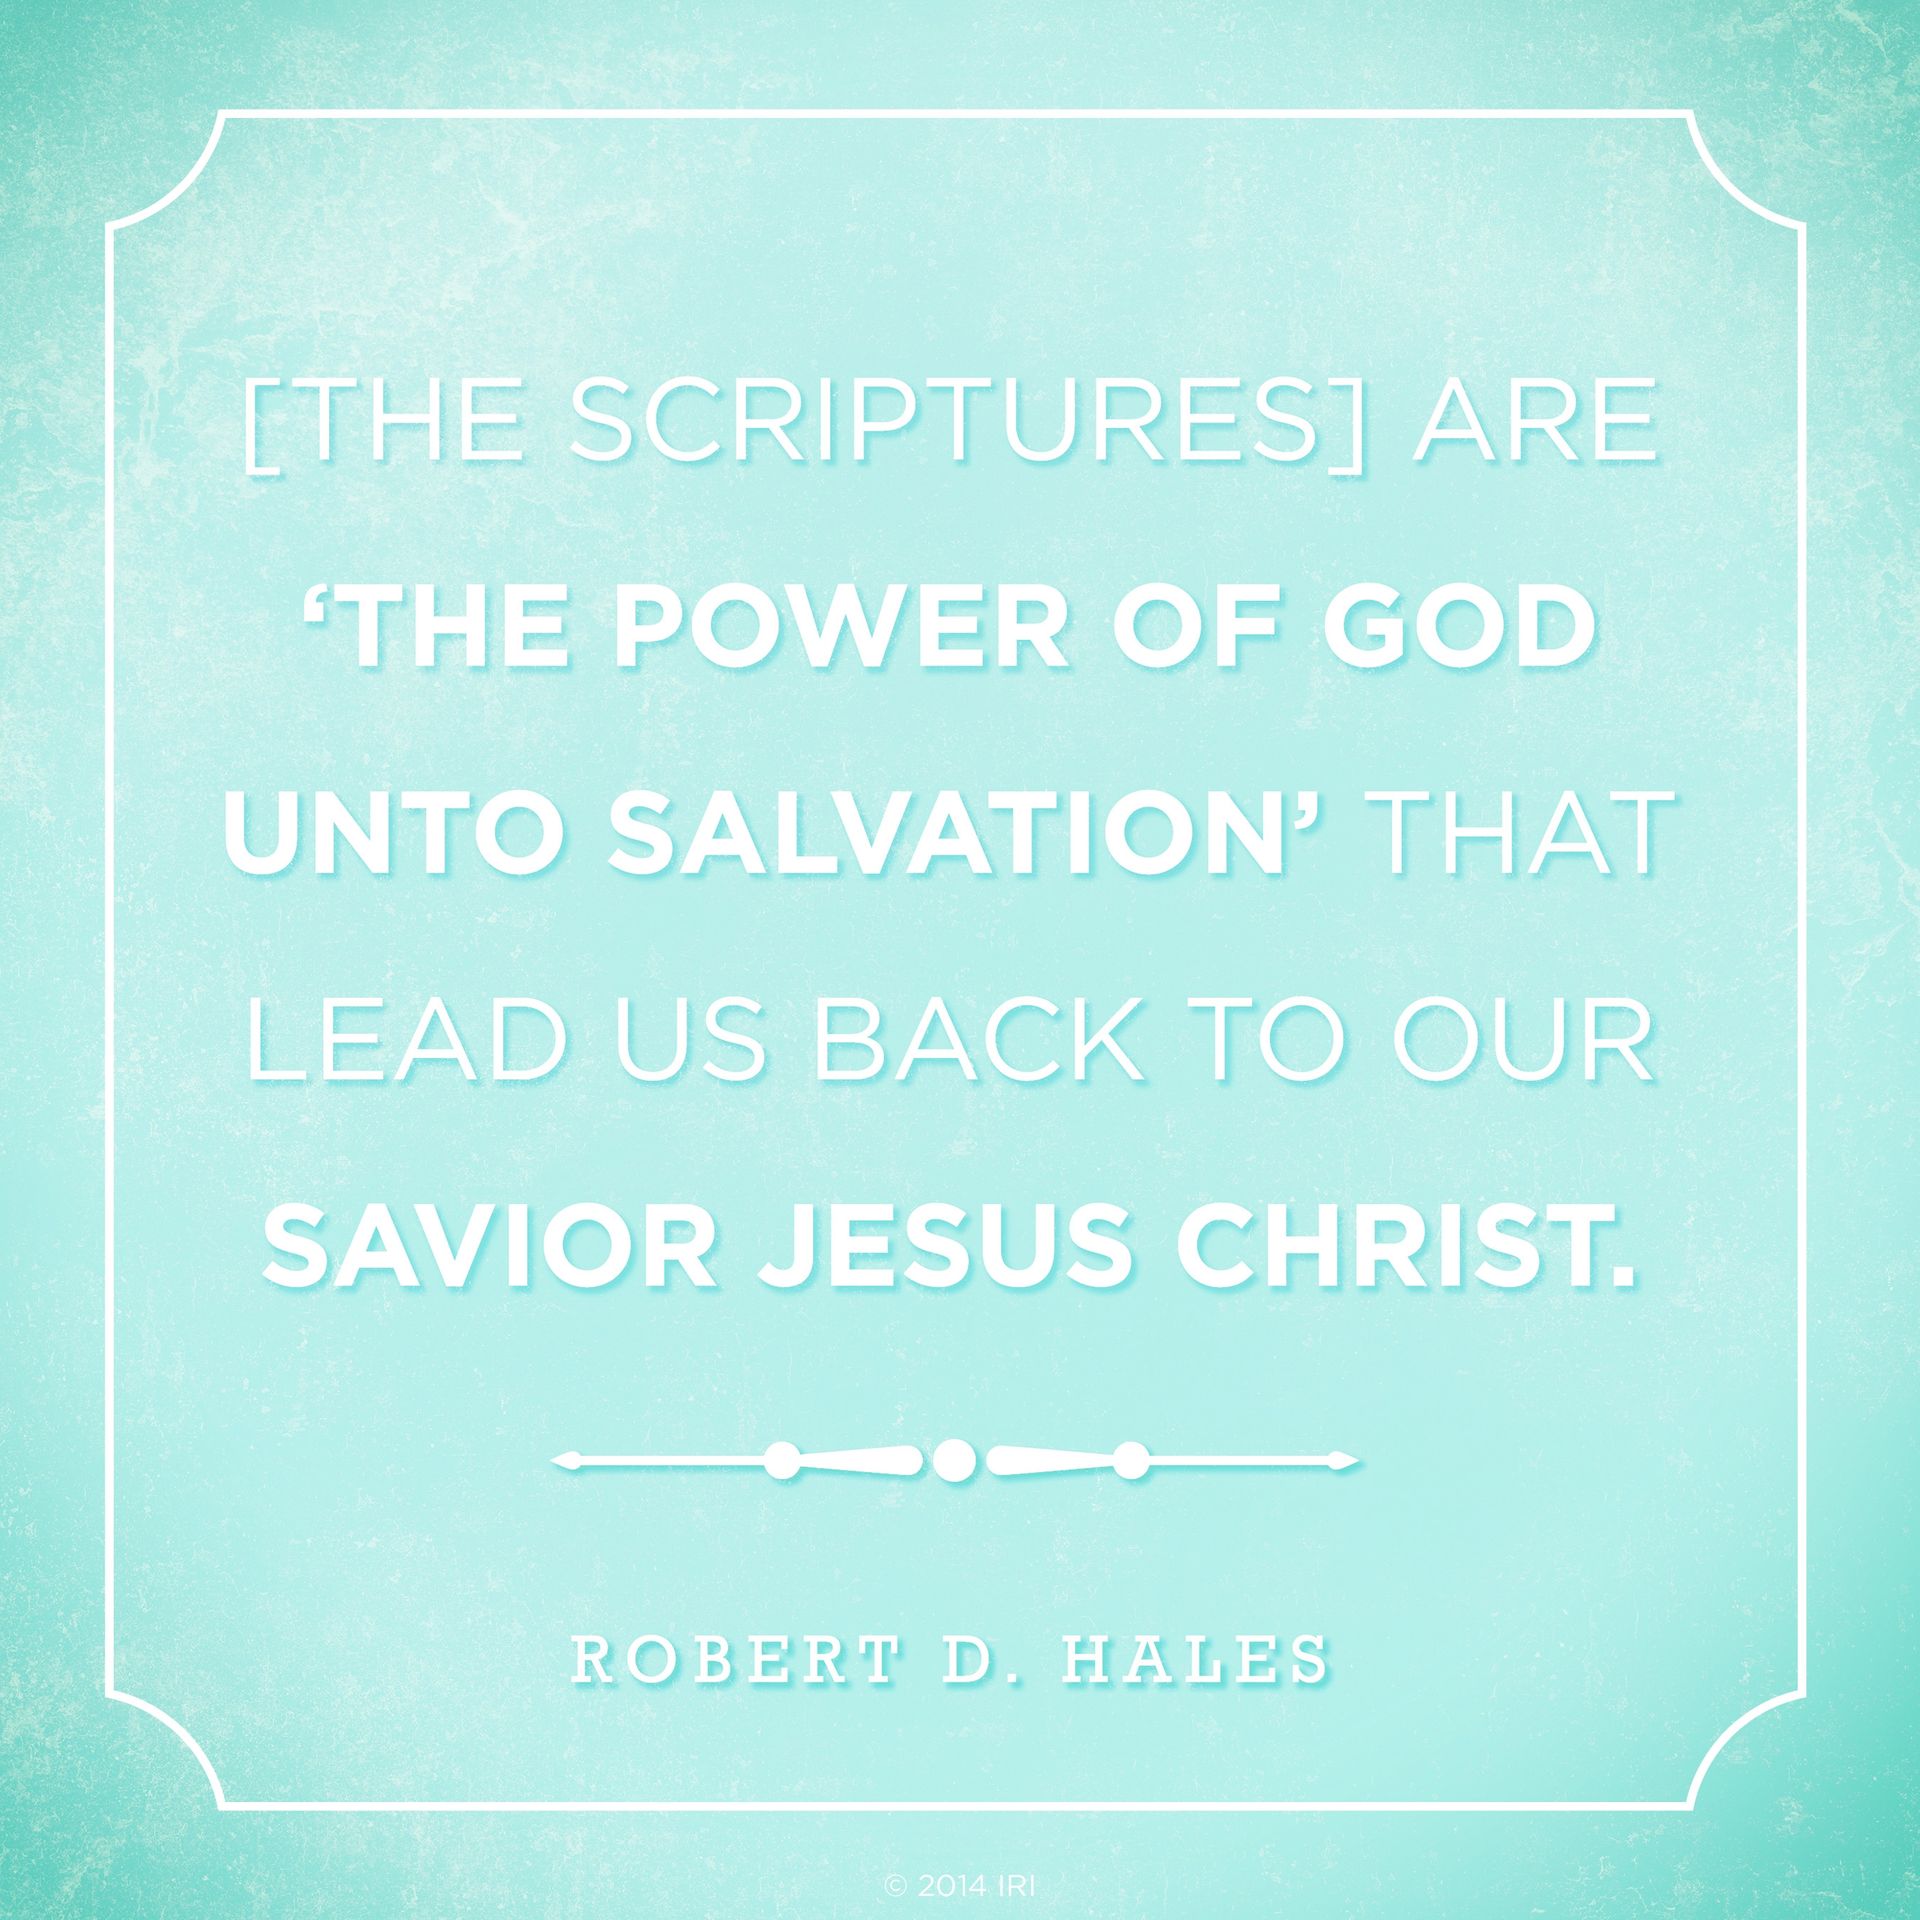 “[The scriptures] are ‘the power of God unto salvation’ that lead us back to our Savior Jesus Christ.”—Elder Robert D. Hales, “Holy Scriptures: The Power of God unto Our Salvation”